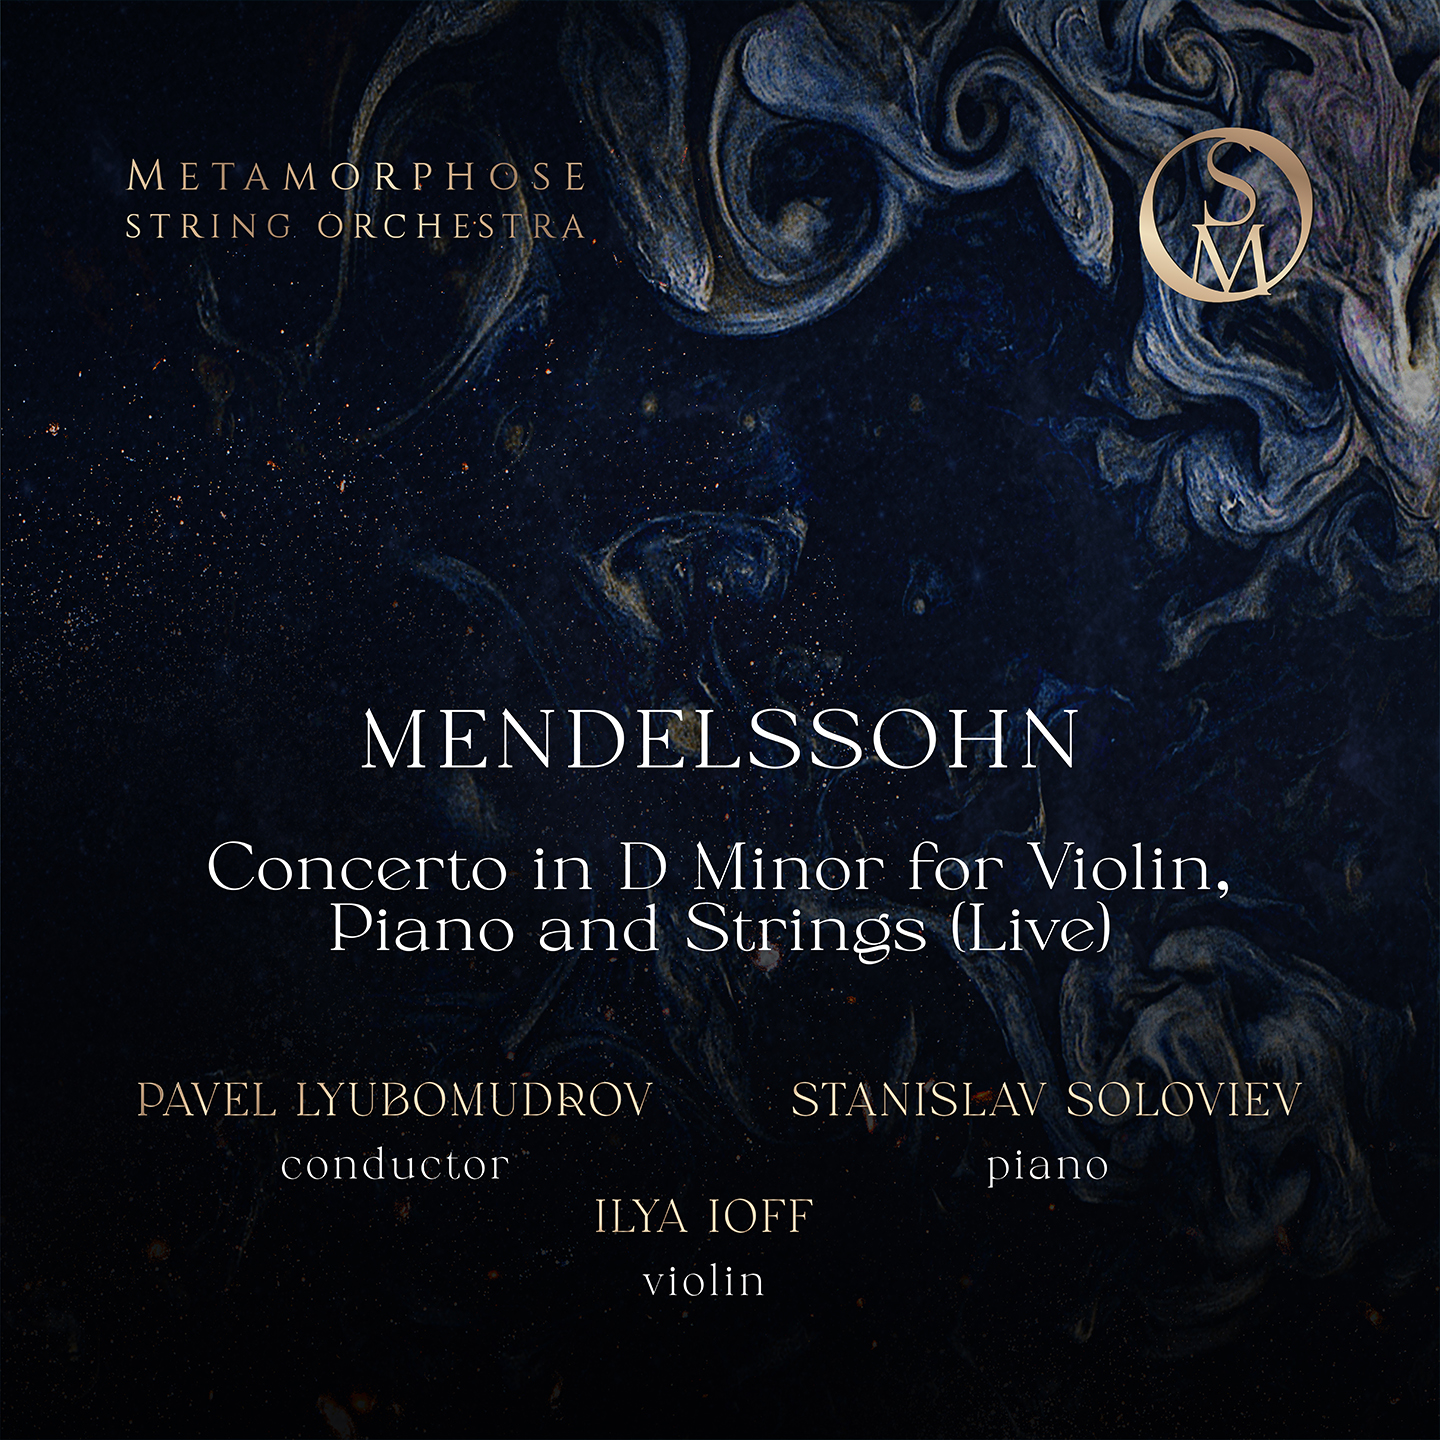 Mendelssohn: Double Concerto for Piano, Violin and Strings in D minor (Live)